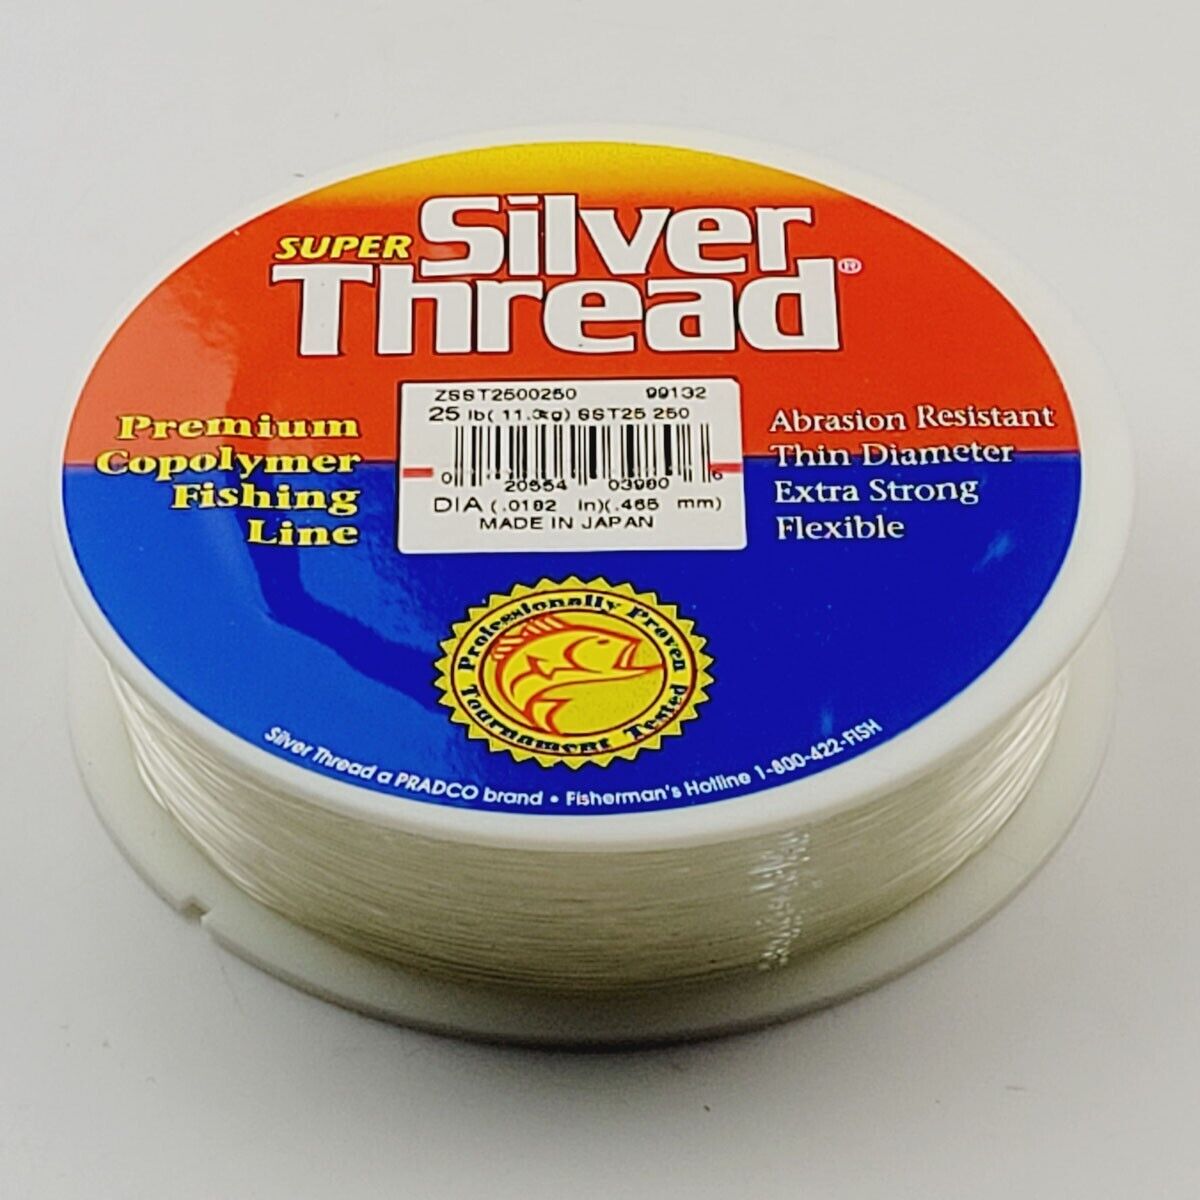 Berkley Monofilament Fishing Lines & Clear 25 lb Line Weight